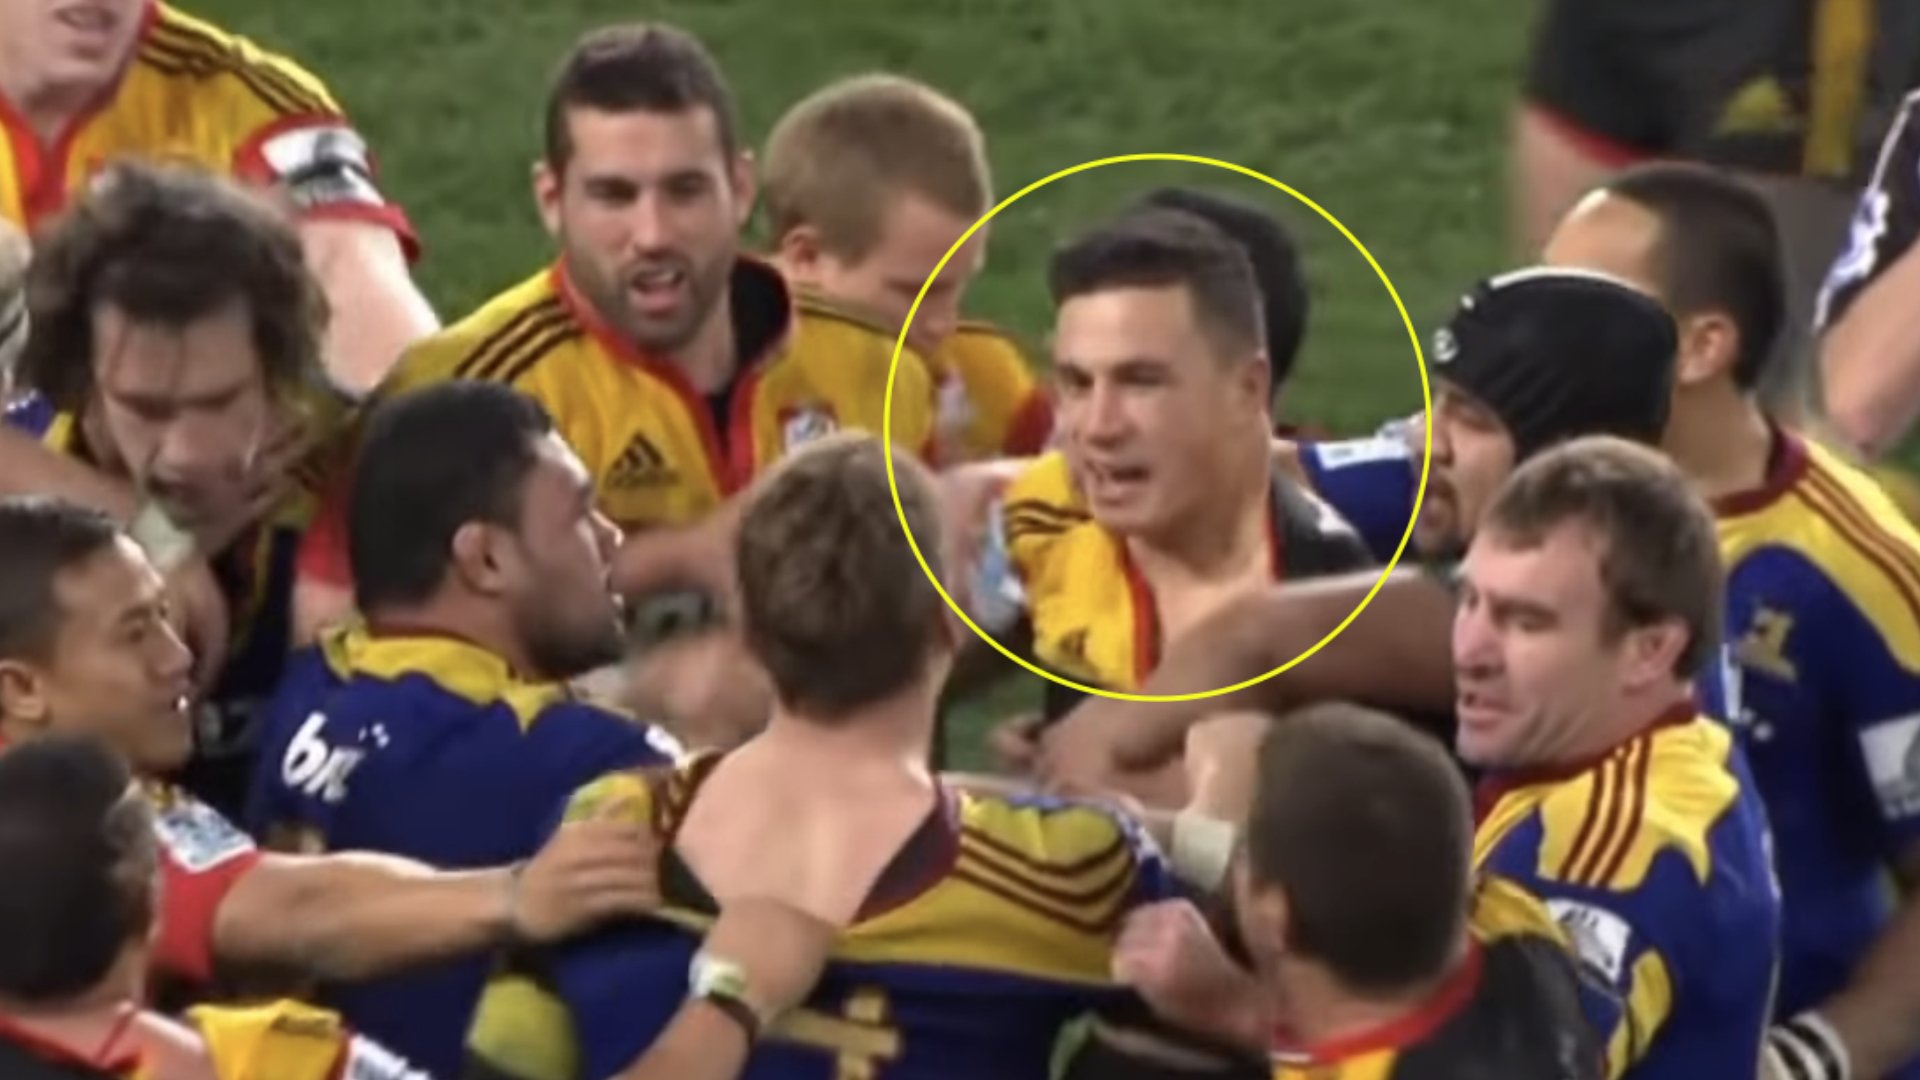 WATCH: The true savagery of Sonny Bill Williams is revealed in new damning video